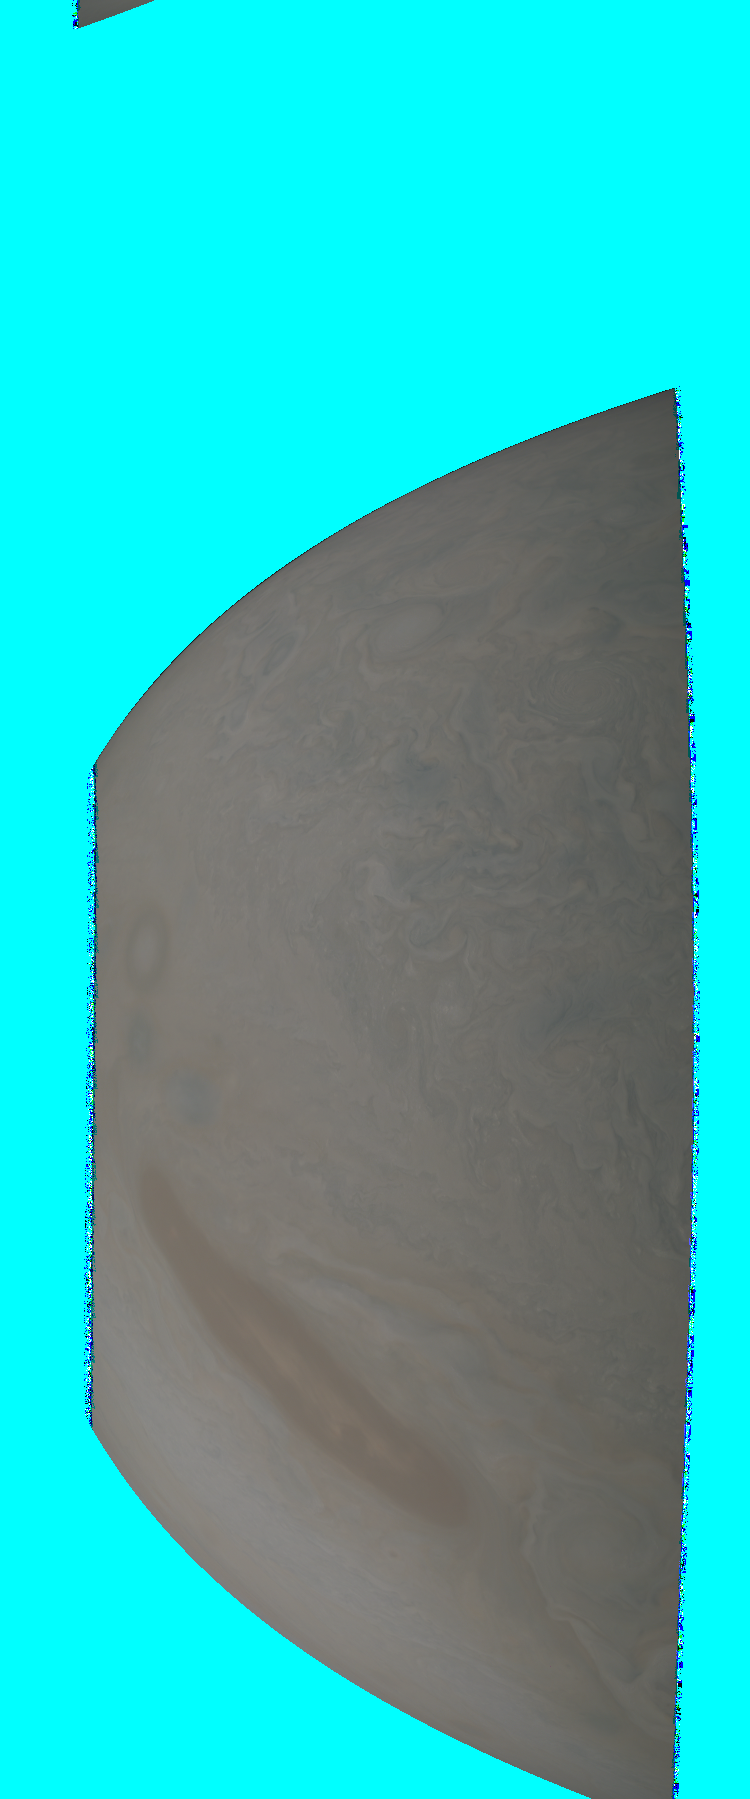 JNCE_2018250_15C00022_V01-raw.bmp_mask_10px_30.063000s_cx809.0_000000_decompanded.bmp_sphC_.png